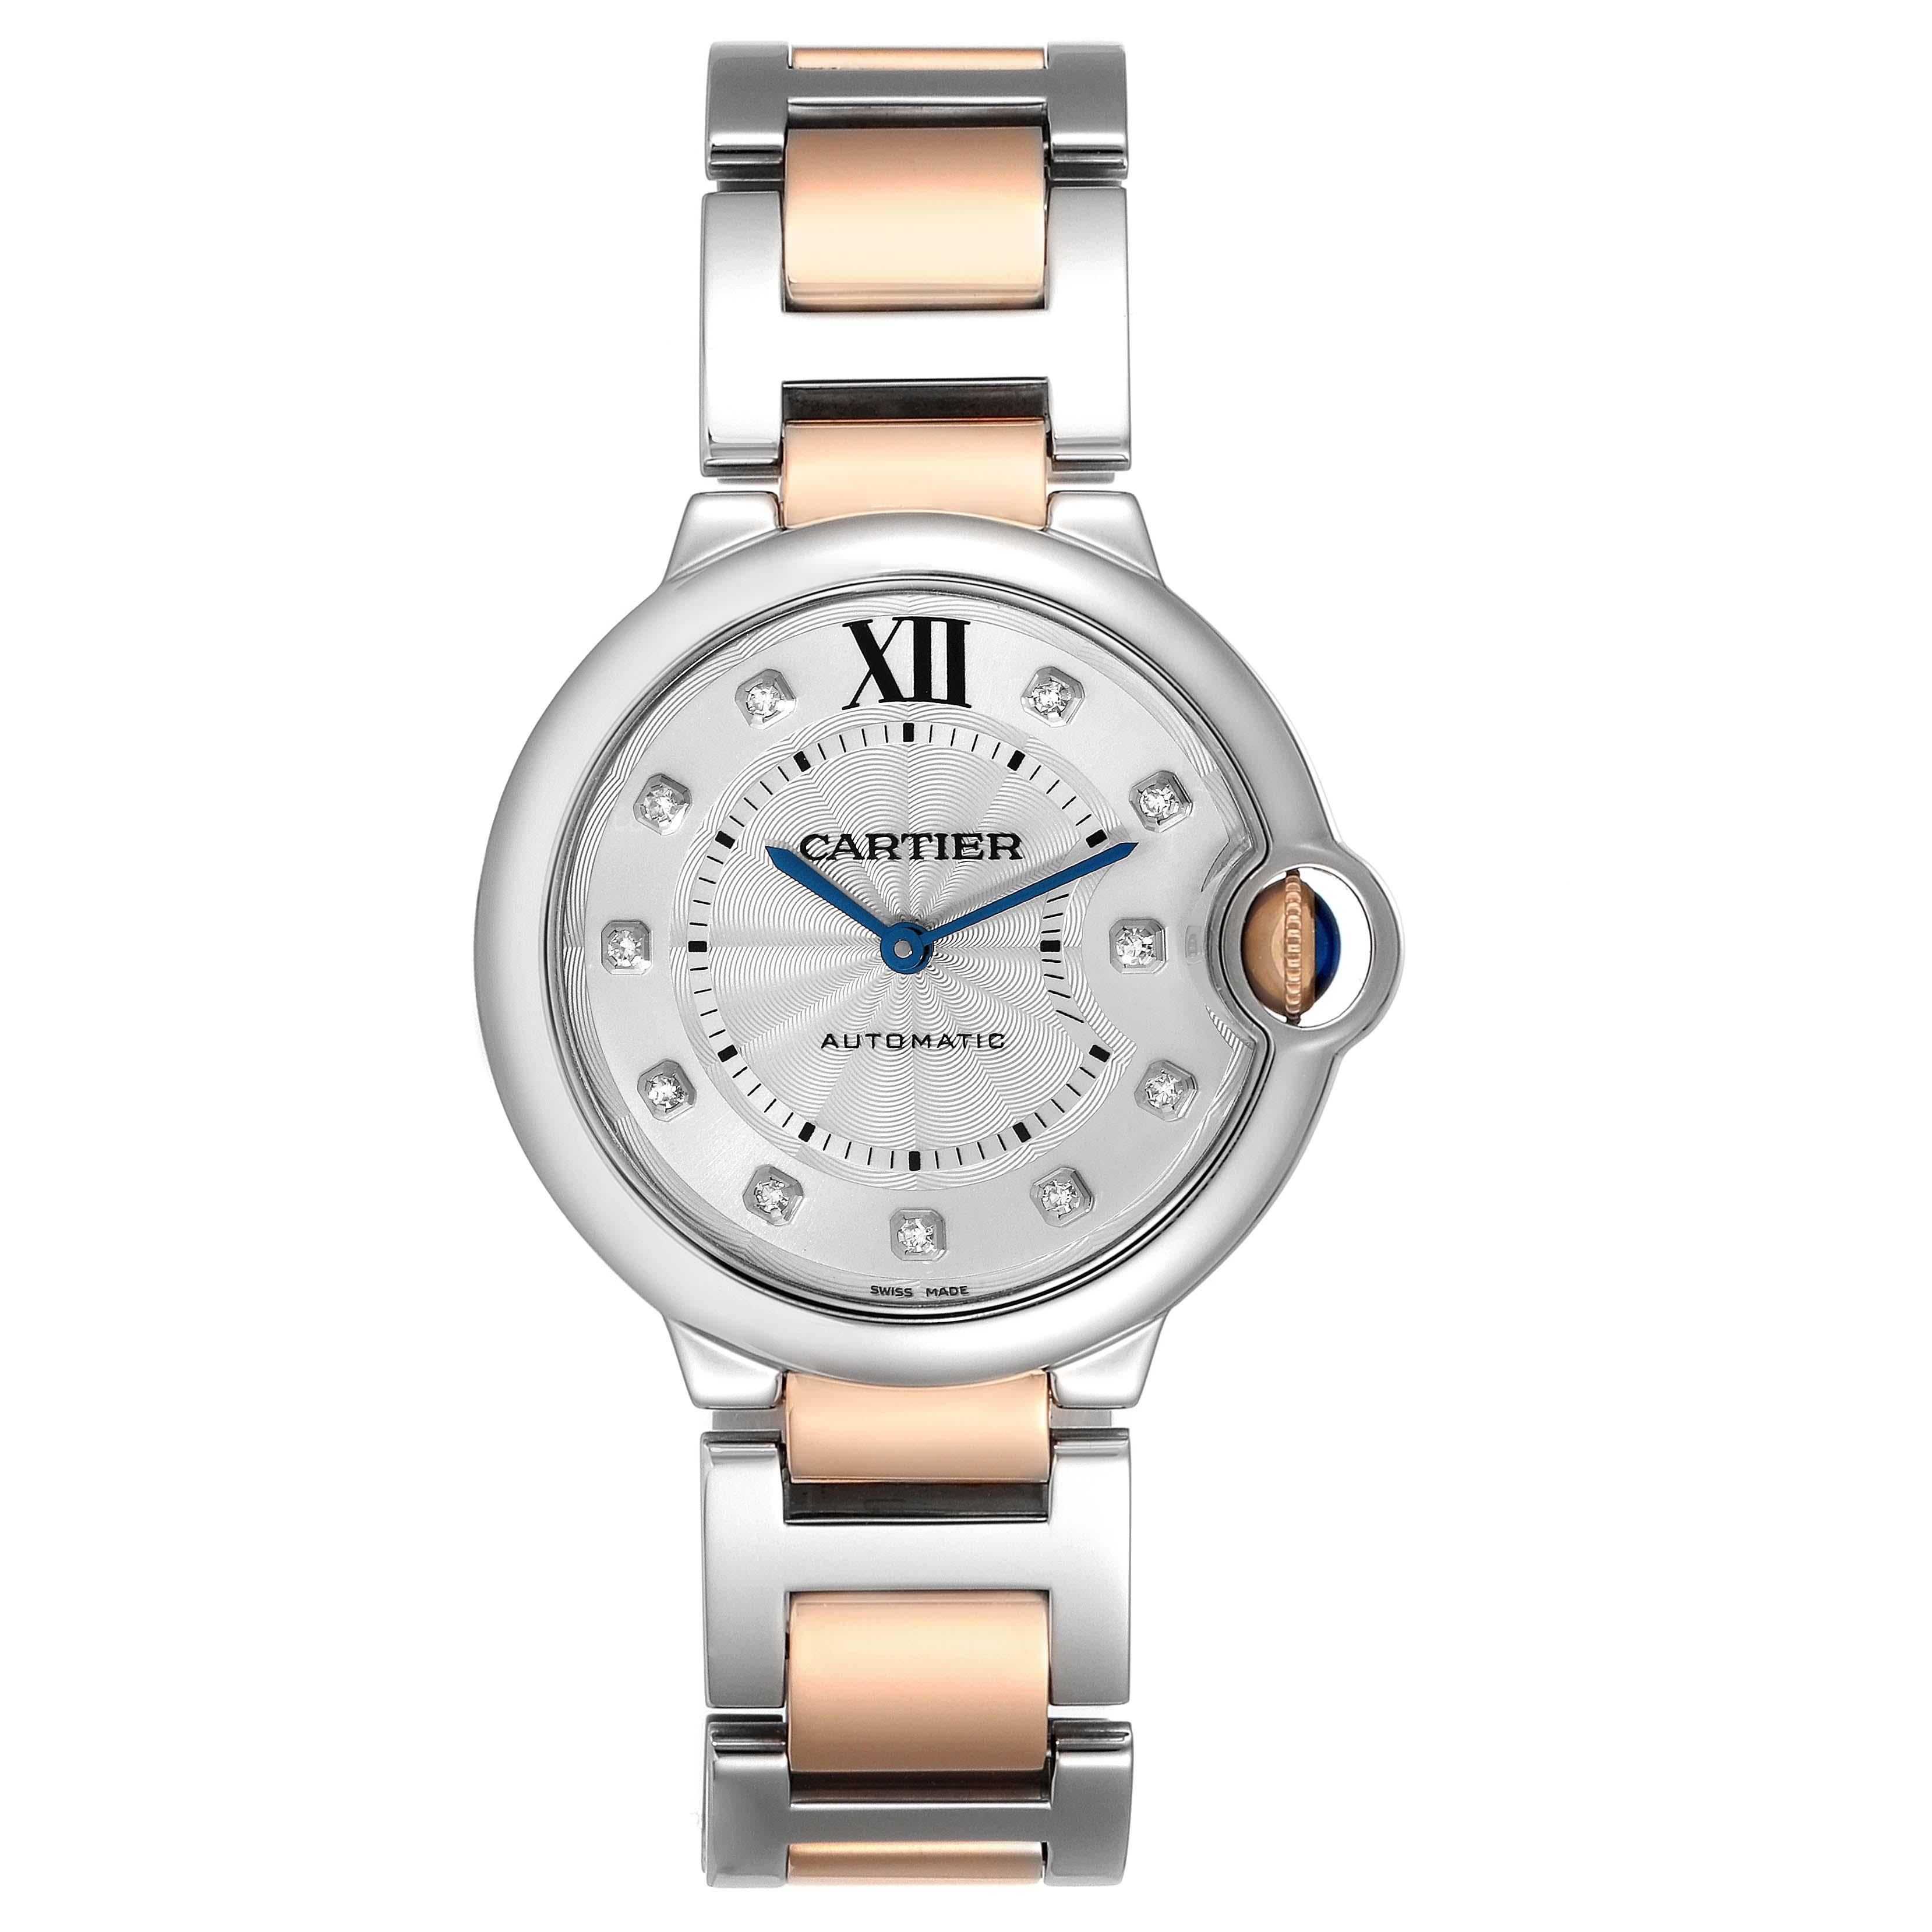 Cartier Ballon Bleu Midsize 36 Steel Rose Gold Diamond Ladies Watch W3BB0018. Automatic self-winding movement. Stainless steel case 36 mm in diameter. 18k rose gold fluted crown set with the blue spinel cabochon. Stainless steel smooth bezel.